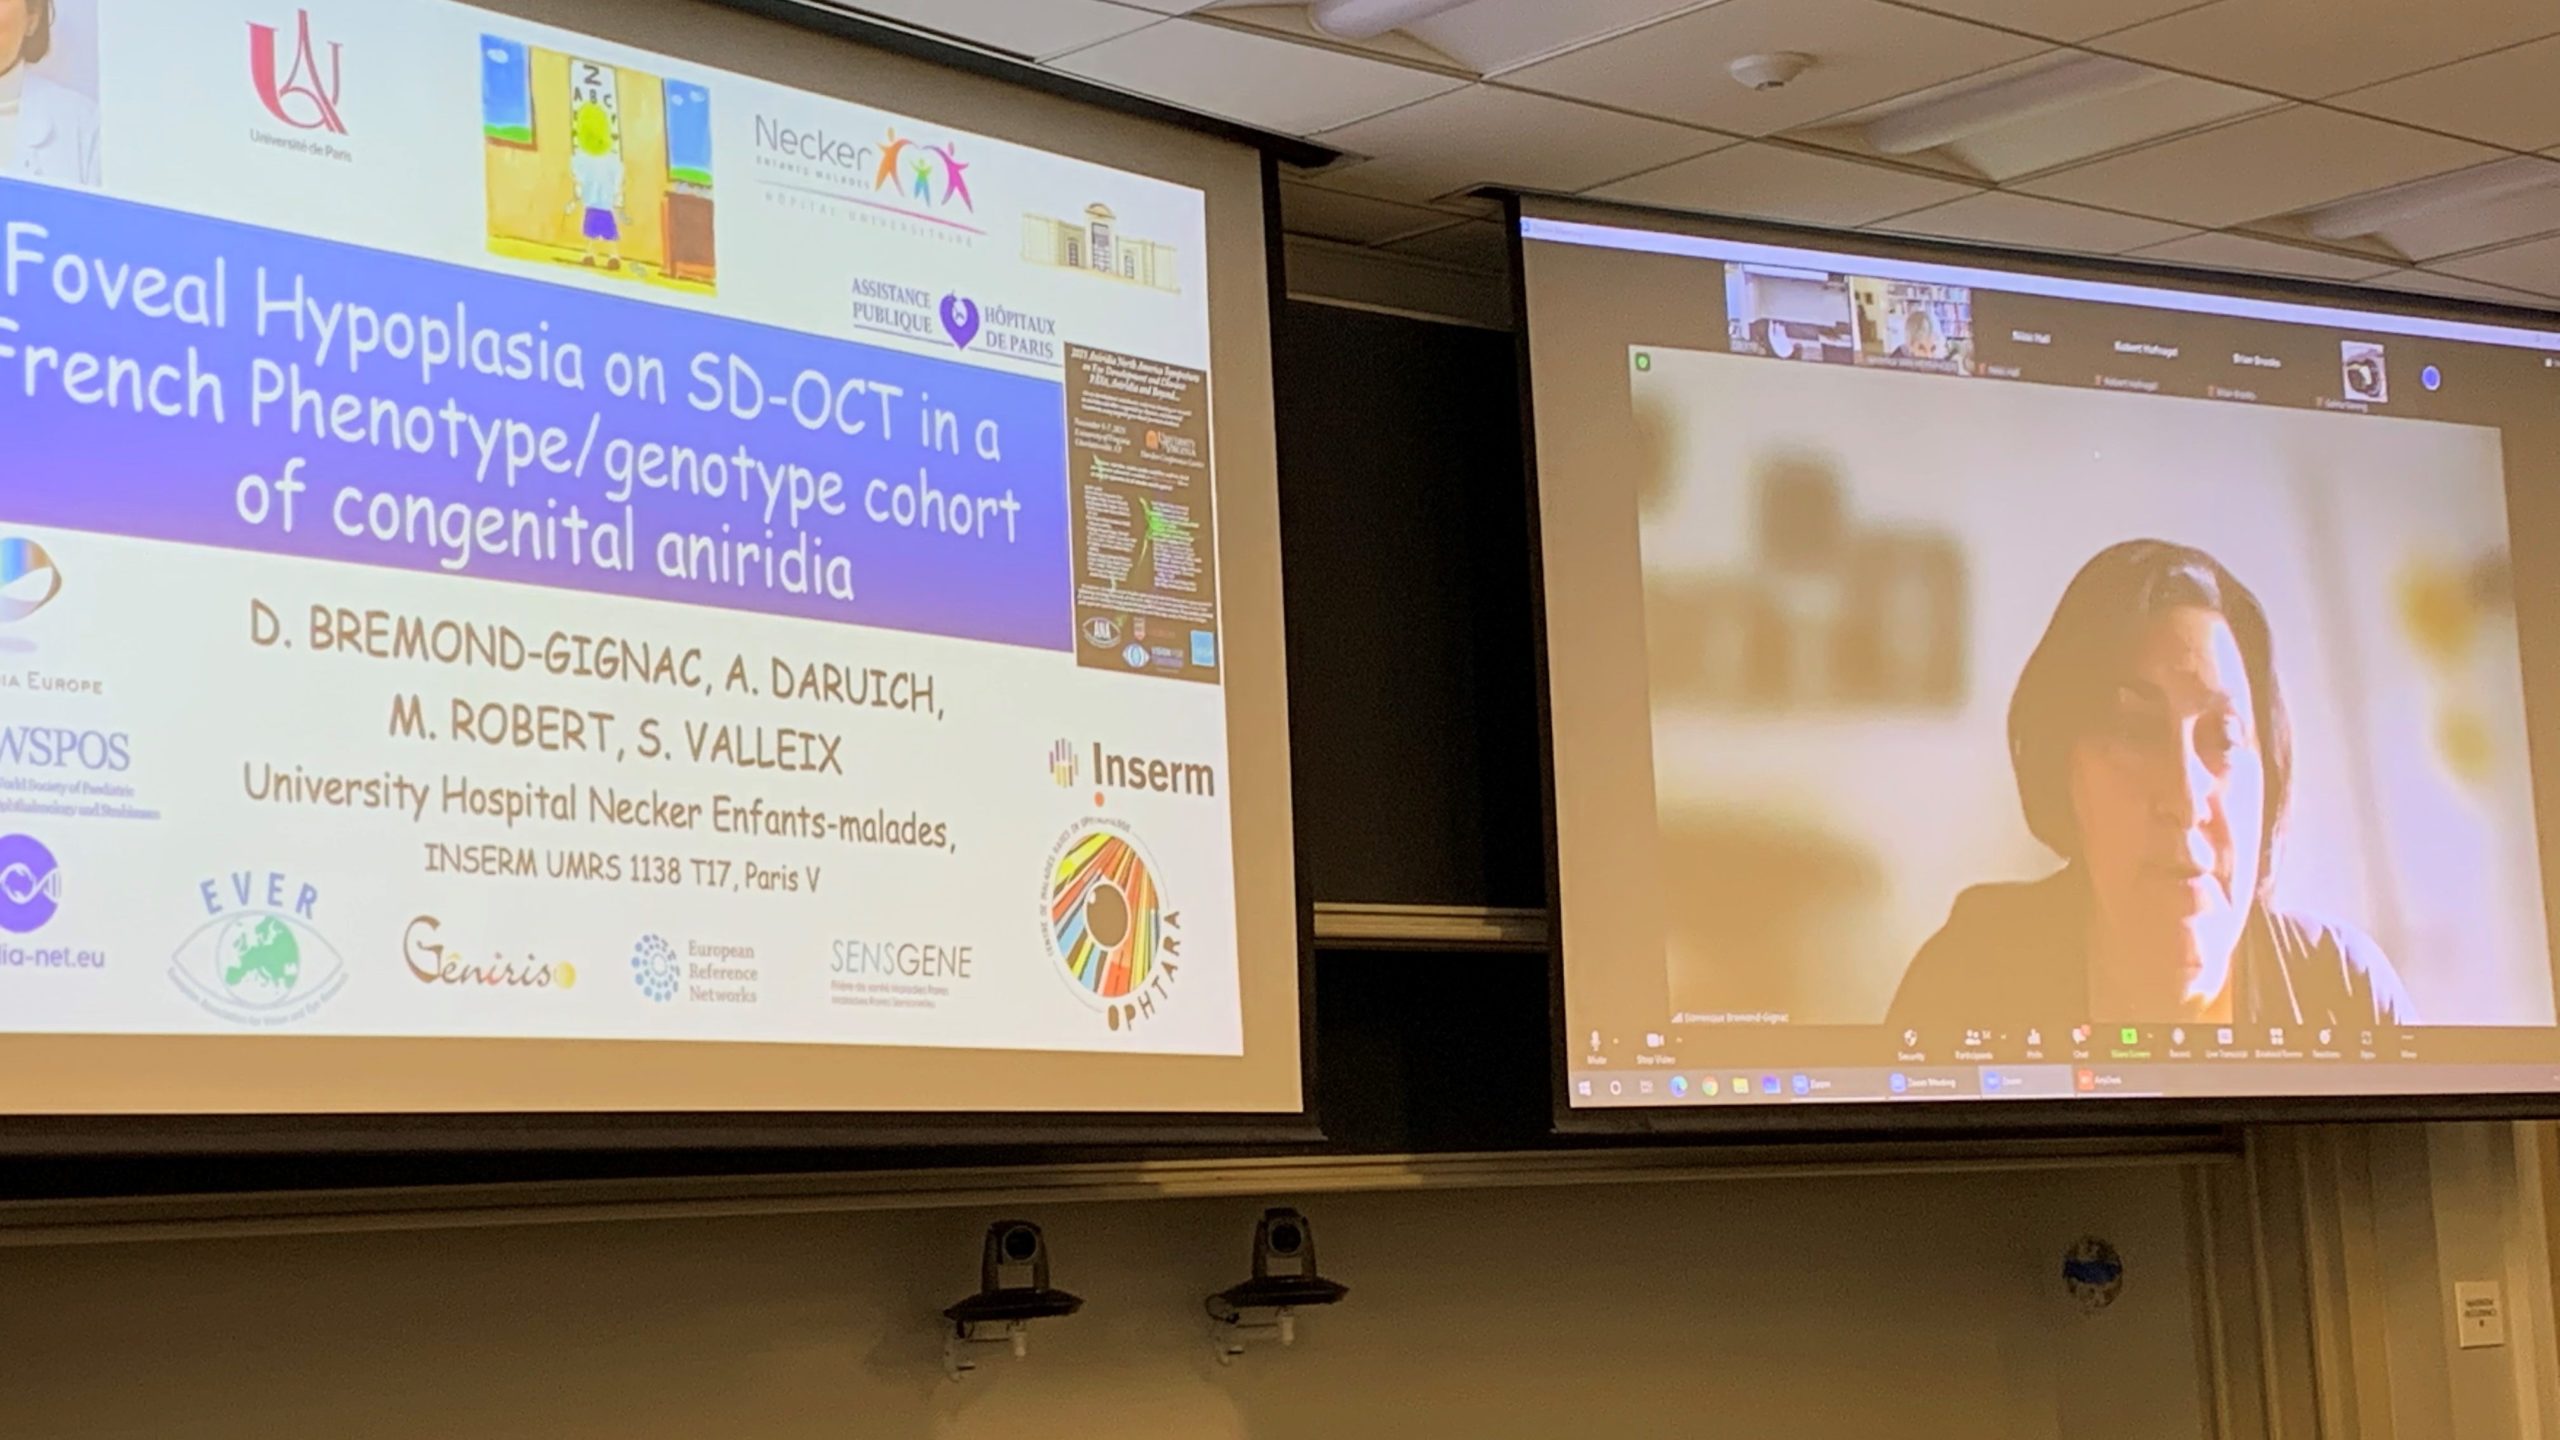 Dominique Bremond-Gignac is shown on one screen at the front of the room, while the title of her talk is shown on the screen next to her.  